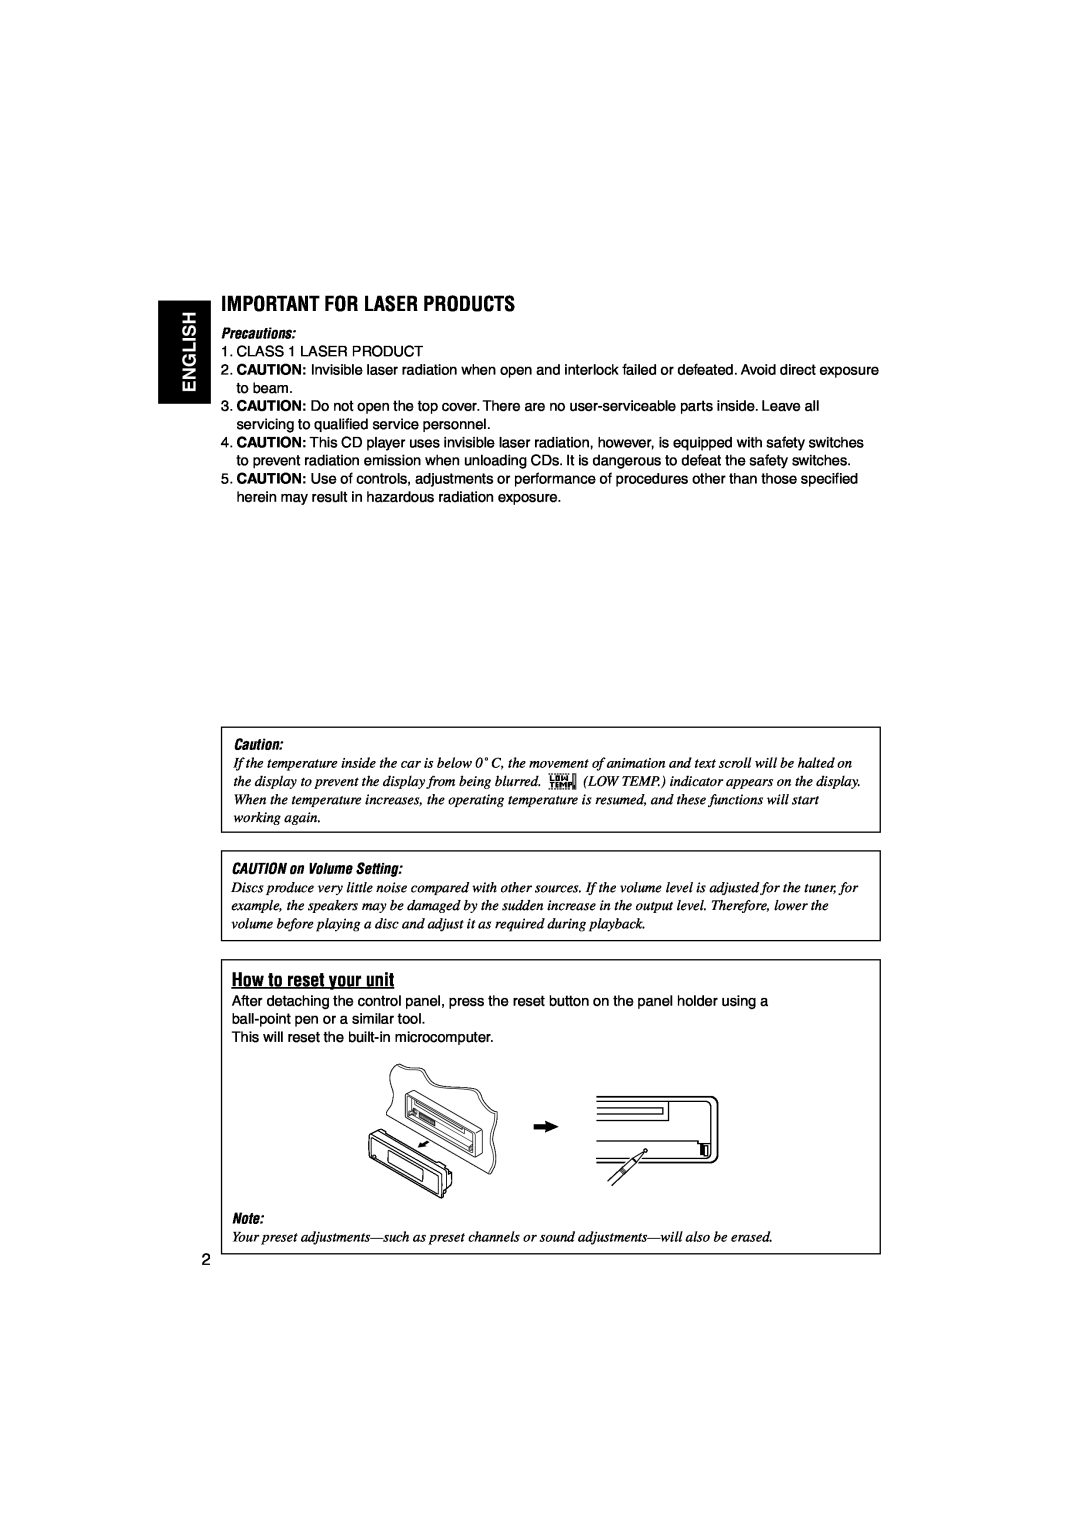 JVC KD-LH3105 manual Important For Laser Products, English, How to reset your unit, Precautions, CAUTION on Volume Setting 